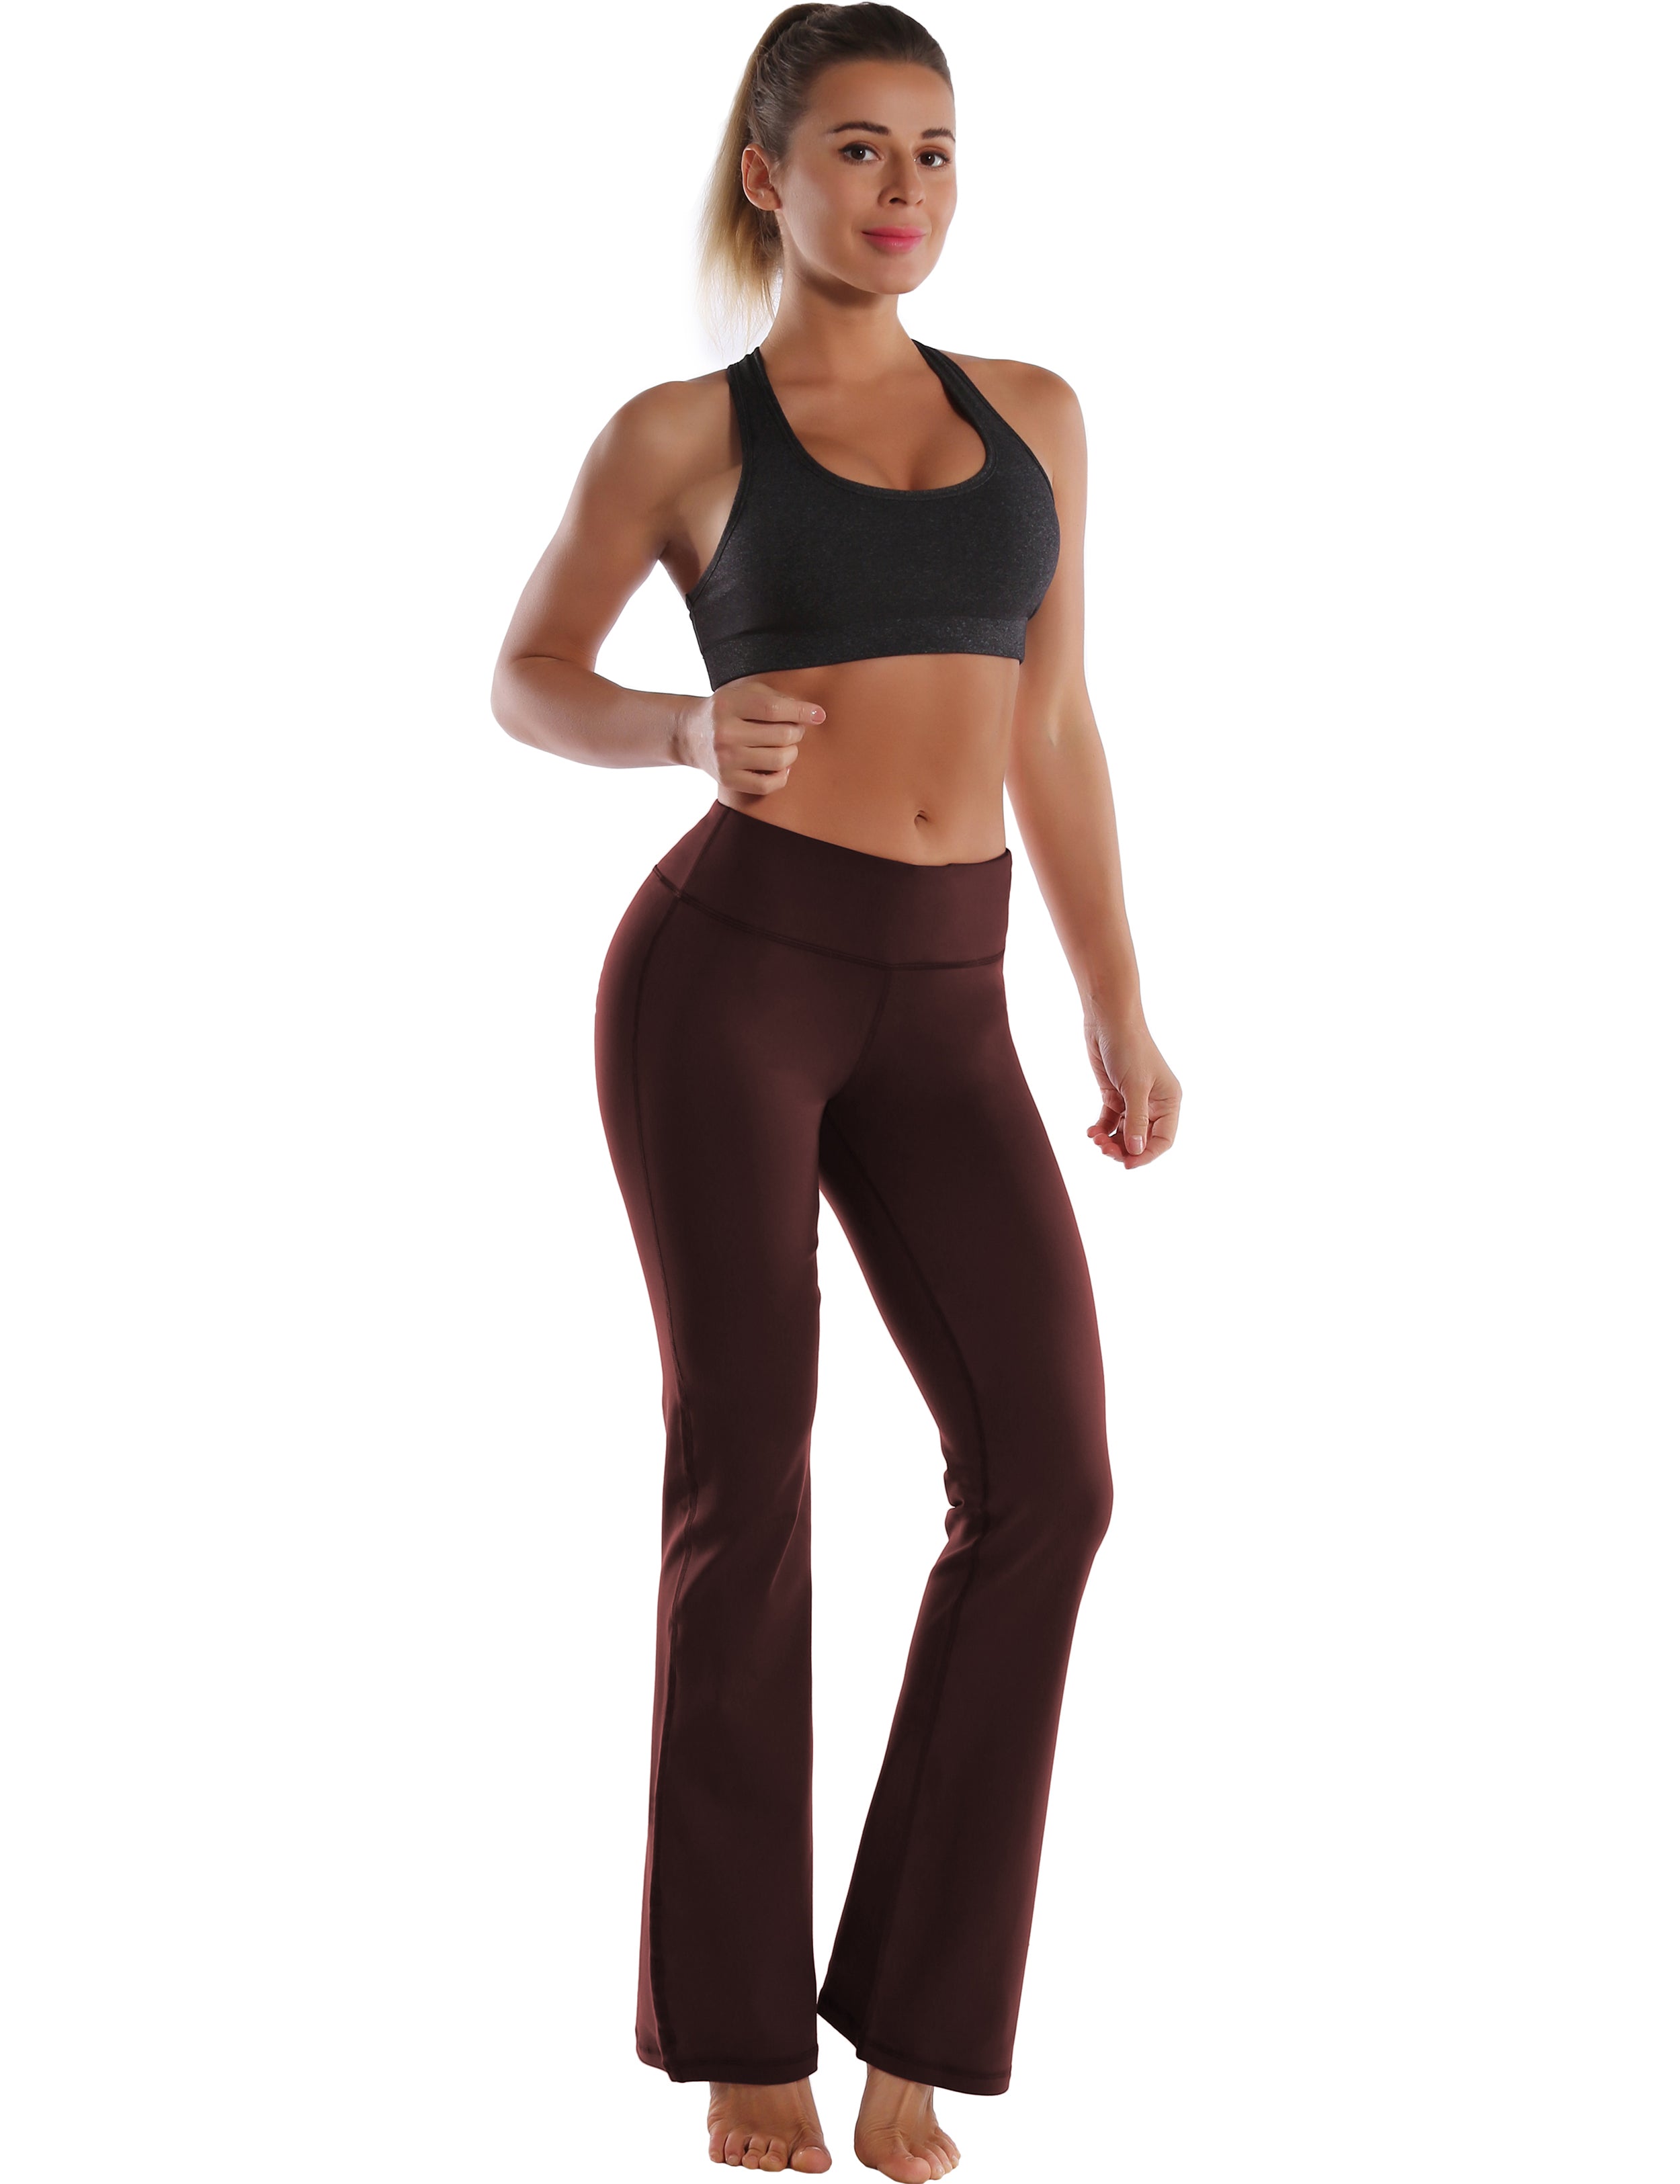 Cotton Nylon Bootcut Leggings mahoganymaroon 87%Nylon/13%Spandex (Super soft, cotton feel , 280gsm) Fabric doesn't attract lint easily 4-way stretch No see-through Moisture-wicking Inner pocket Four lengths